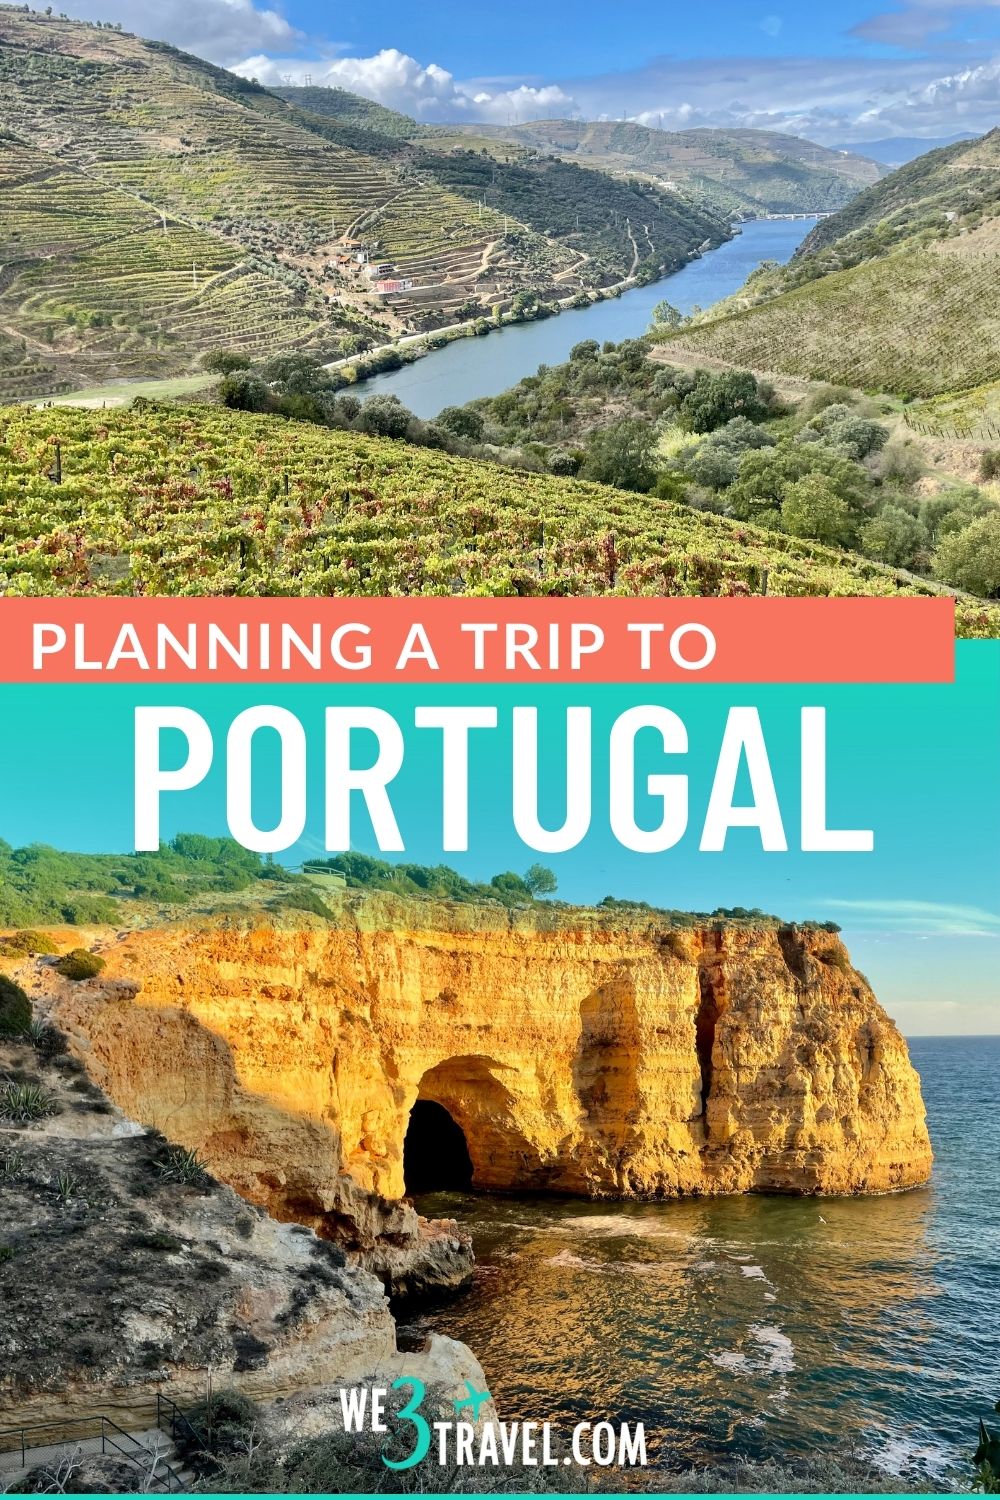 Planning a trip to Portugal